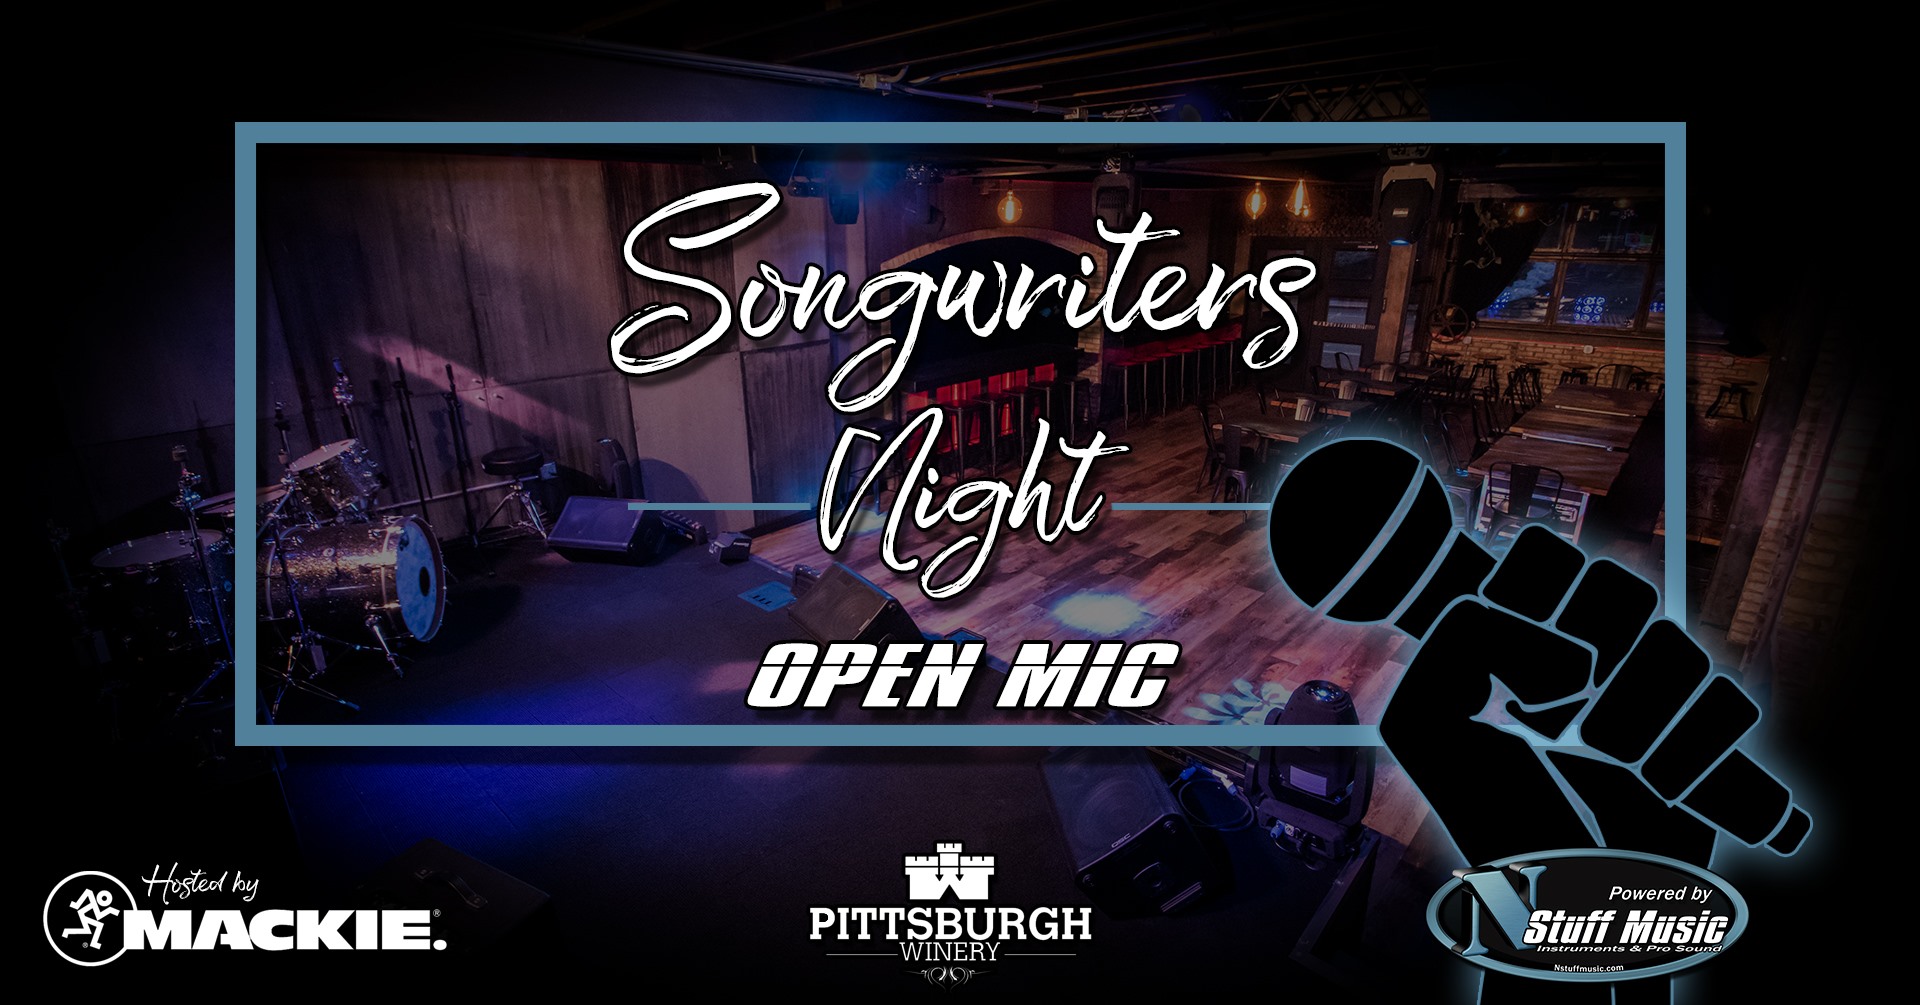 Songwriters Open Mic Night | Next Door Cafe at N Stuff Music